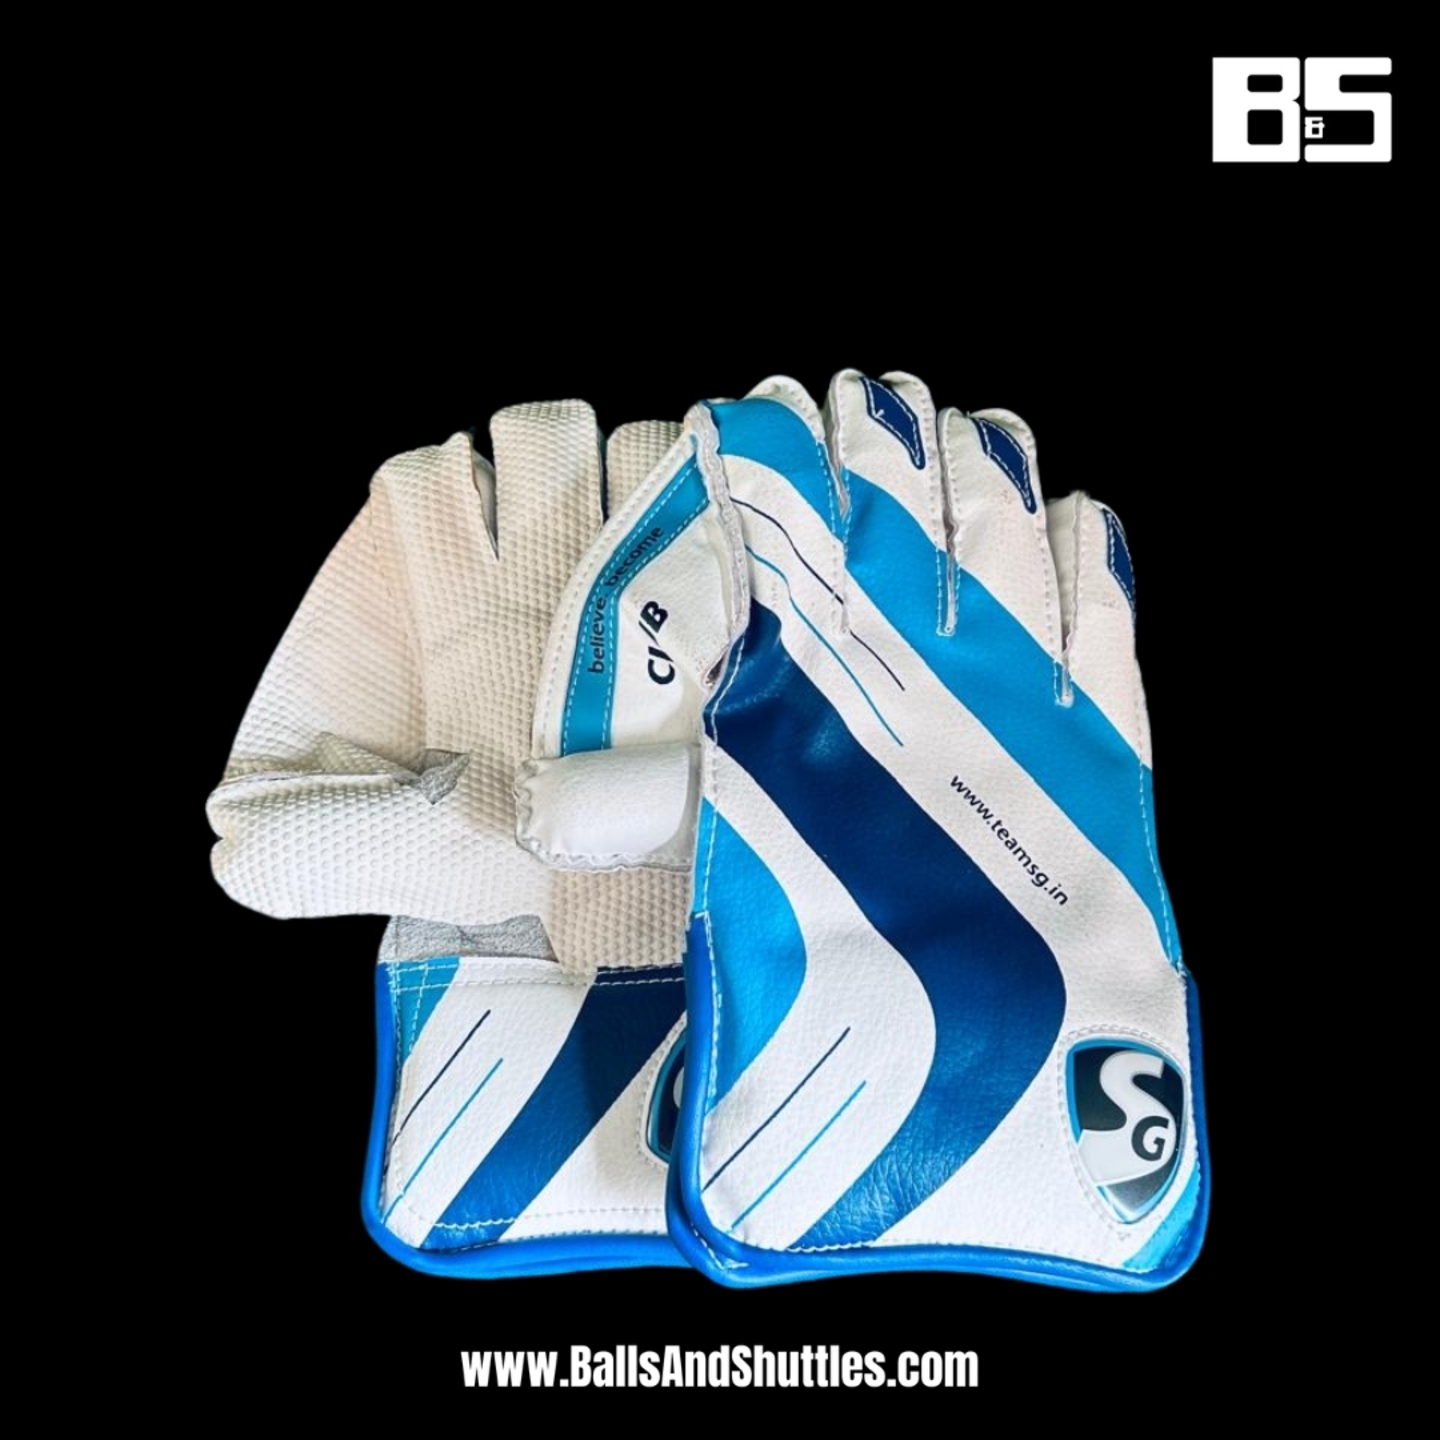 SG CLUB WICKET KEEPING GLOVES | SG BOYS SIZE WICKET KEEPING GLOVES